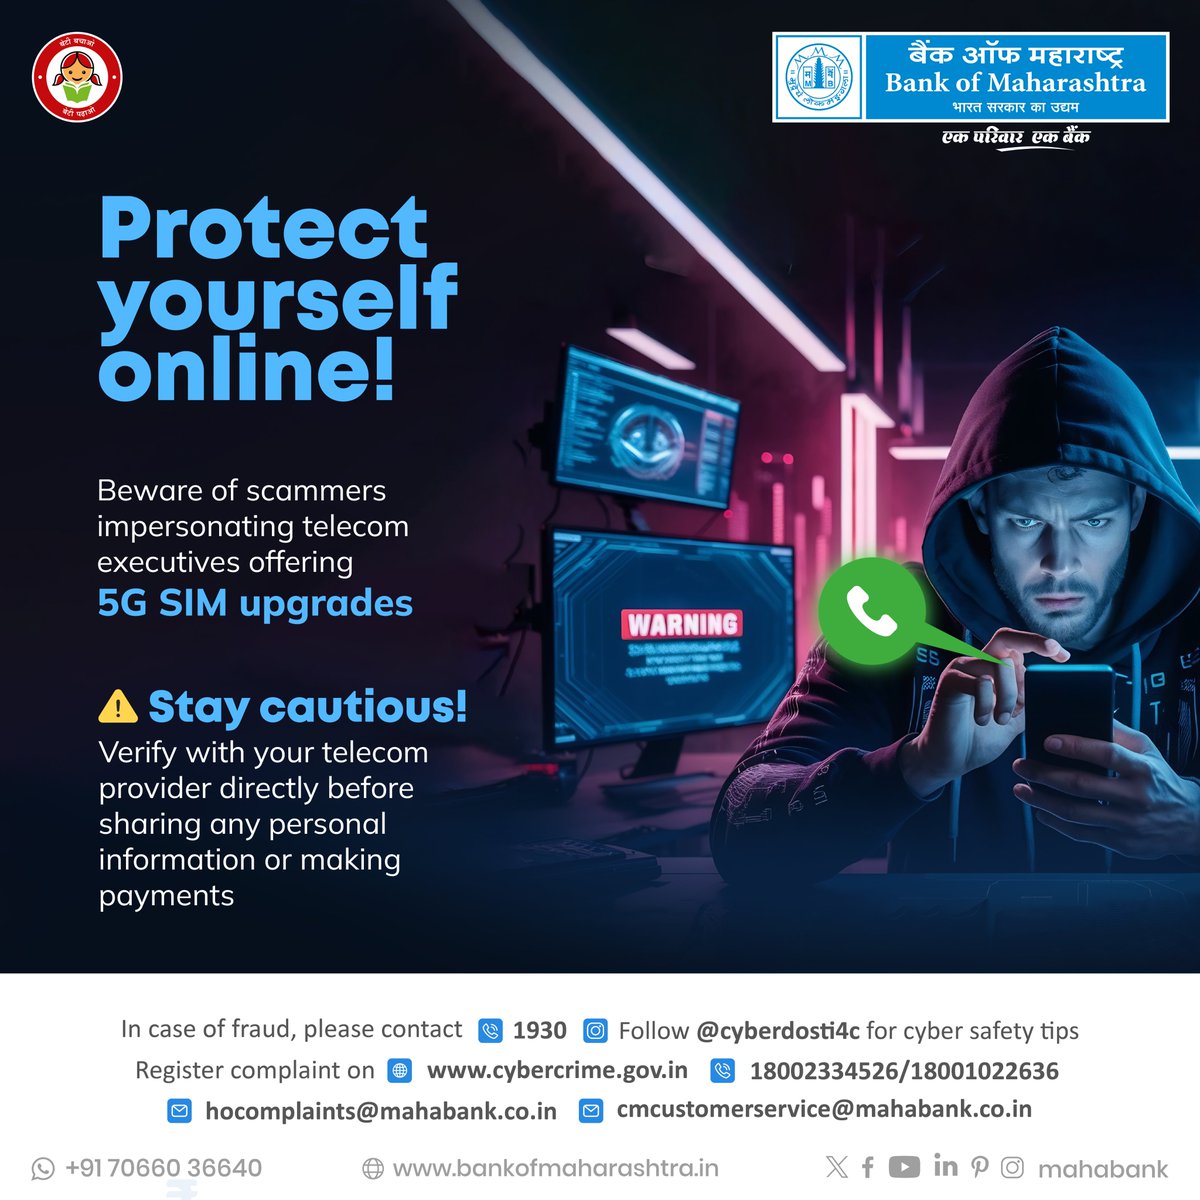 Protect yourself online! Don't fall for scammers pretending to be telecom executives offering 5G SIM upgrades. Stay cautious! Verify with your telecom provider before sharing any details or making payments.

For more cyber tips, click bit.ly/3pxiDkA

#BankofMaharashtra